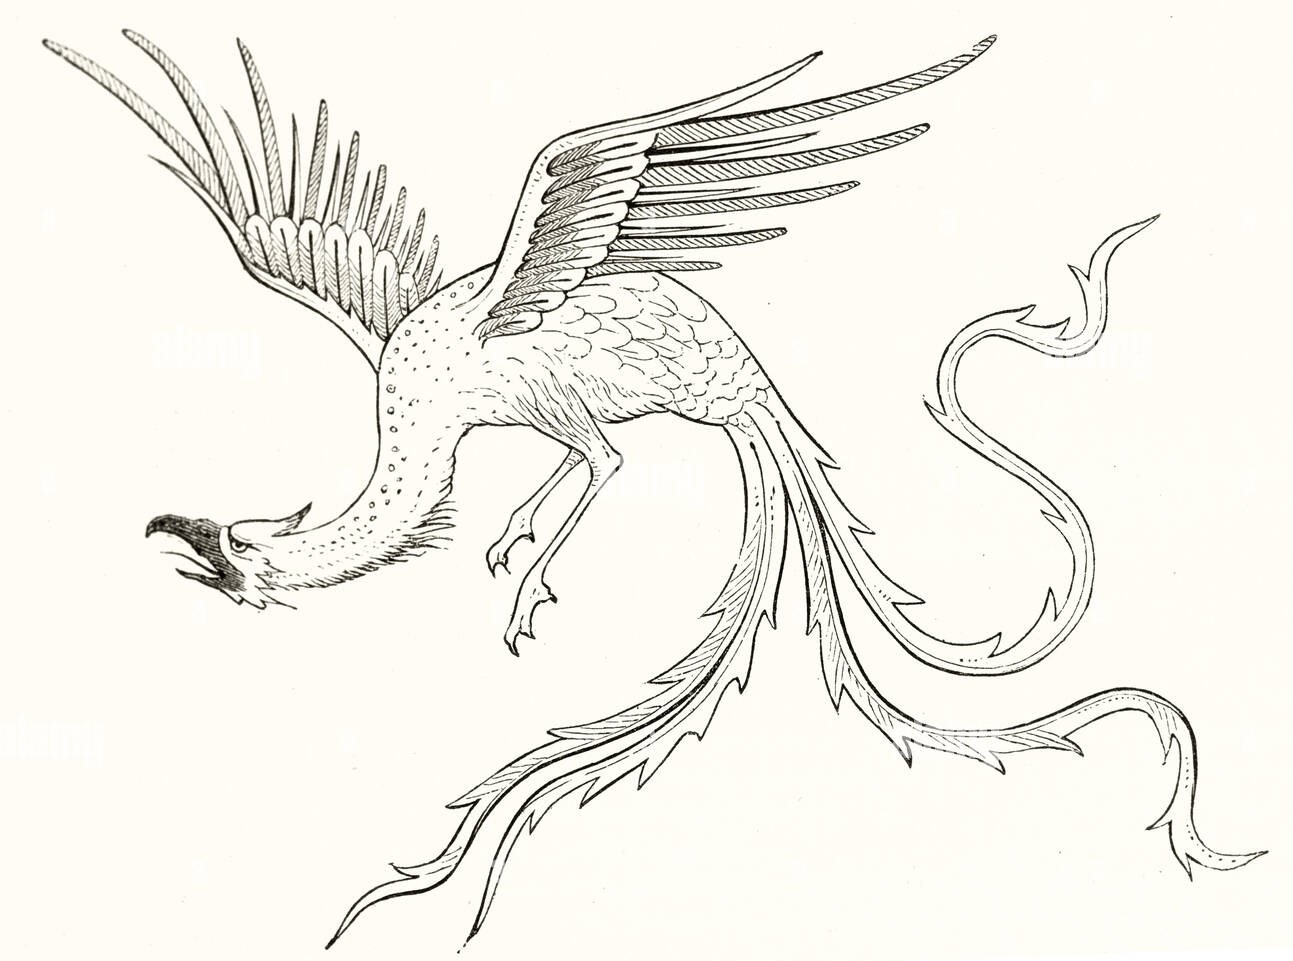 25 Mysterious Mythical Creatures Whose Drawings Make You Question If They Are Real